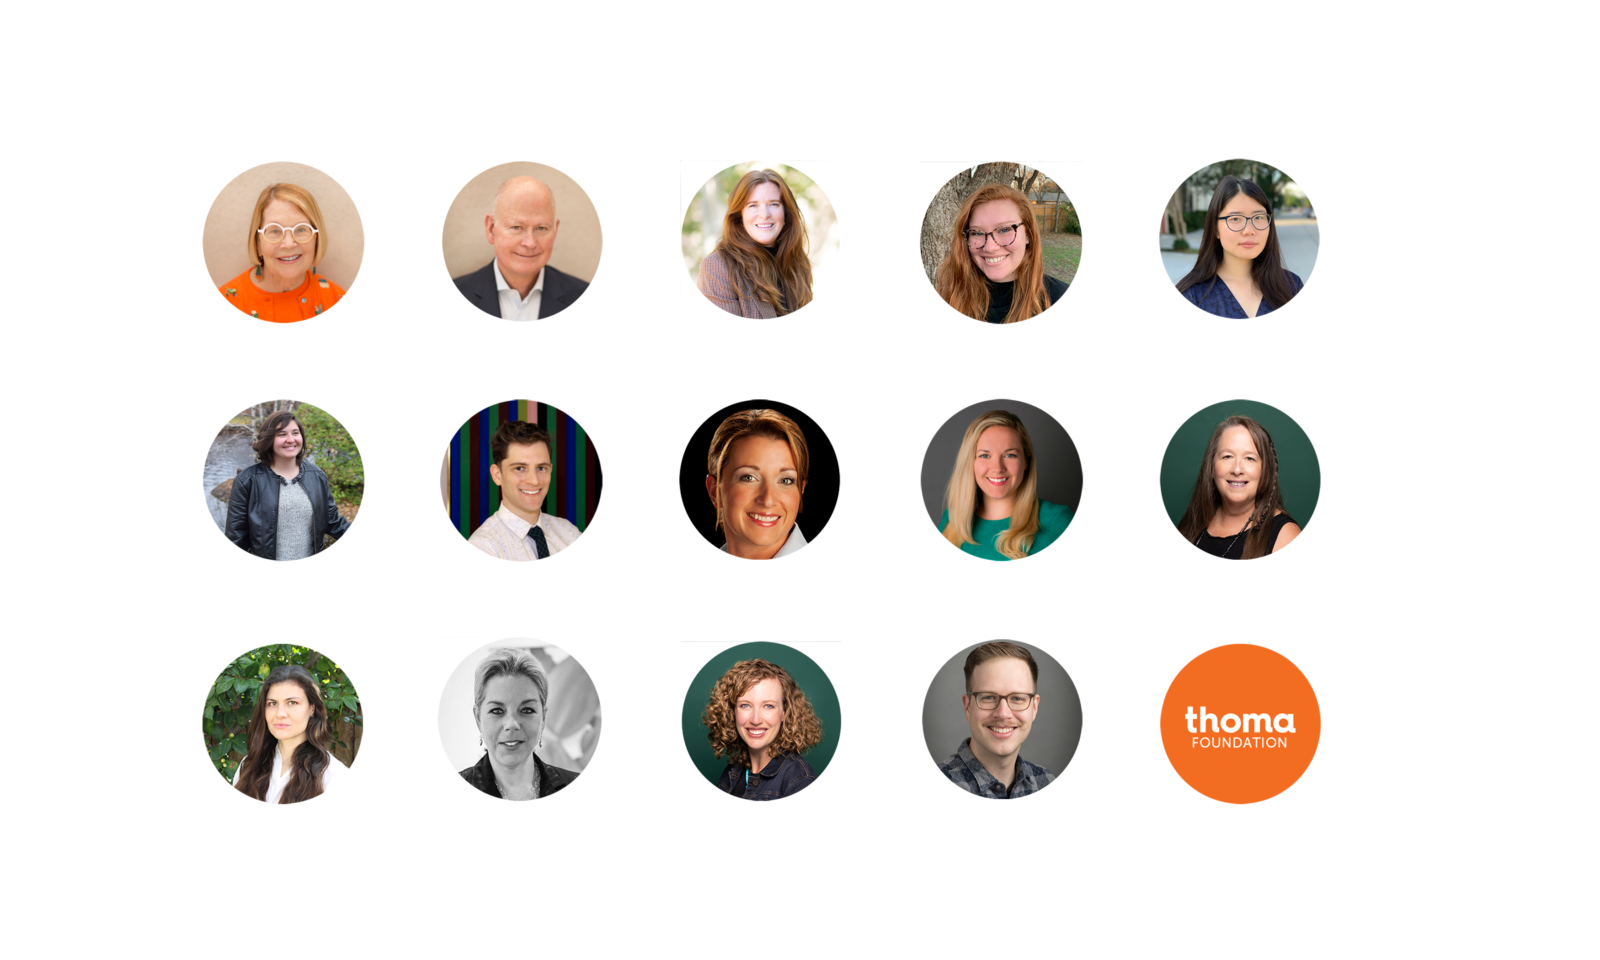 A group of headshots depicting all the team members at the Thoma Foundation.